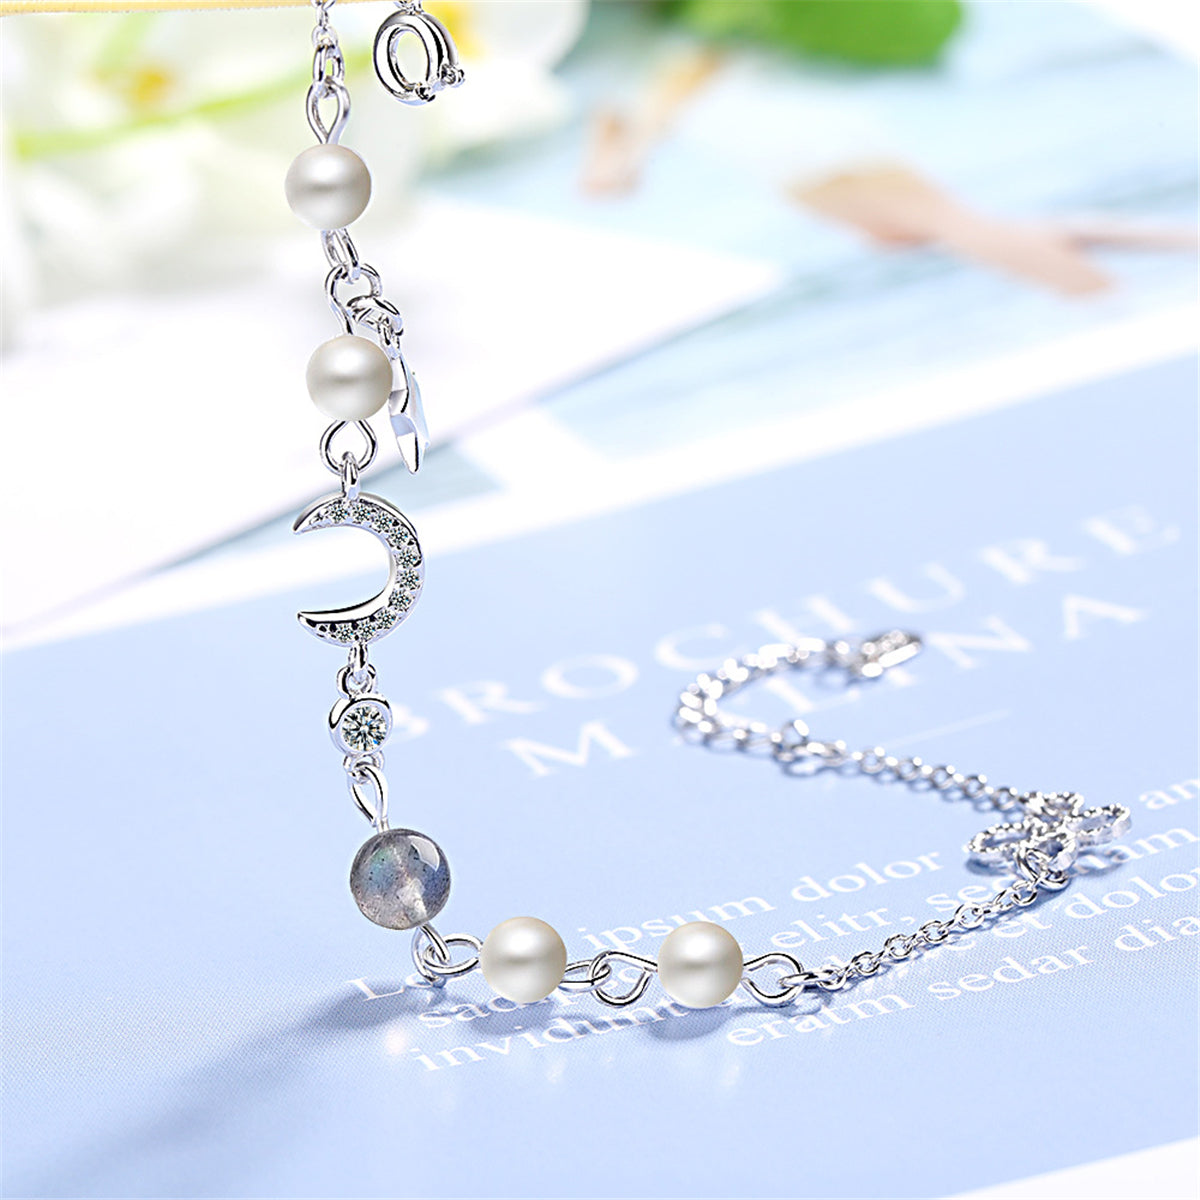 Moonstone & Pearl Silver-Plated Moon Station Bracelet